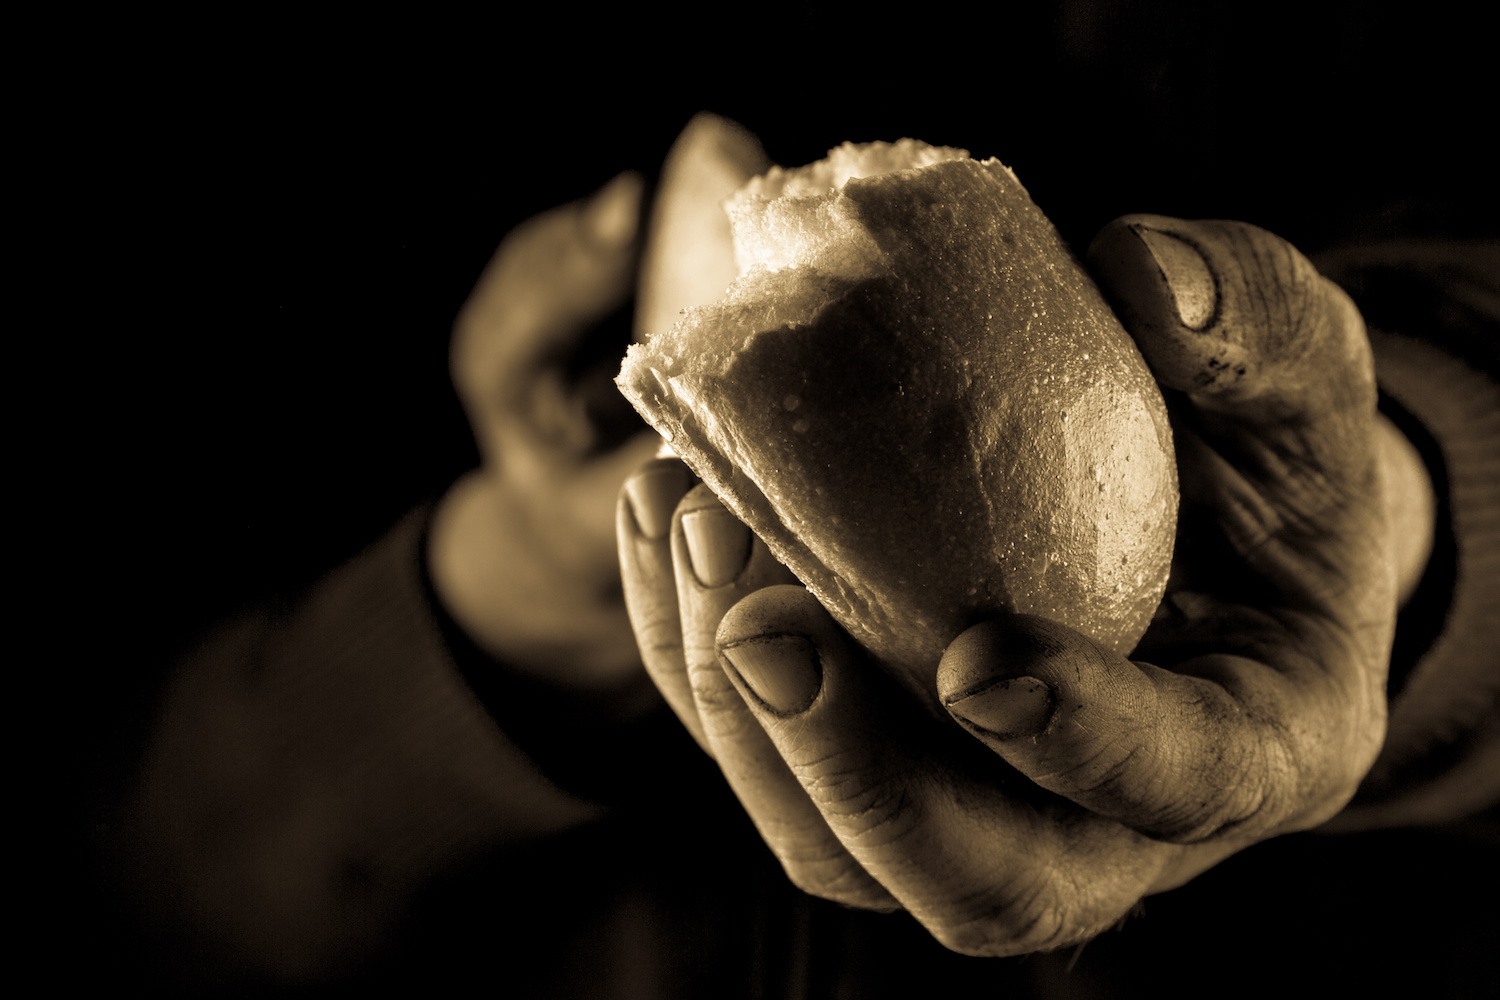 Hand extended to offer bread. Moravian, Hunger & Thirst, Field of Interest, Grant, grants, hungry, MMFA